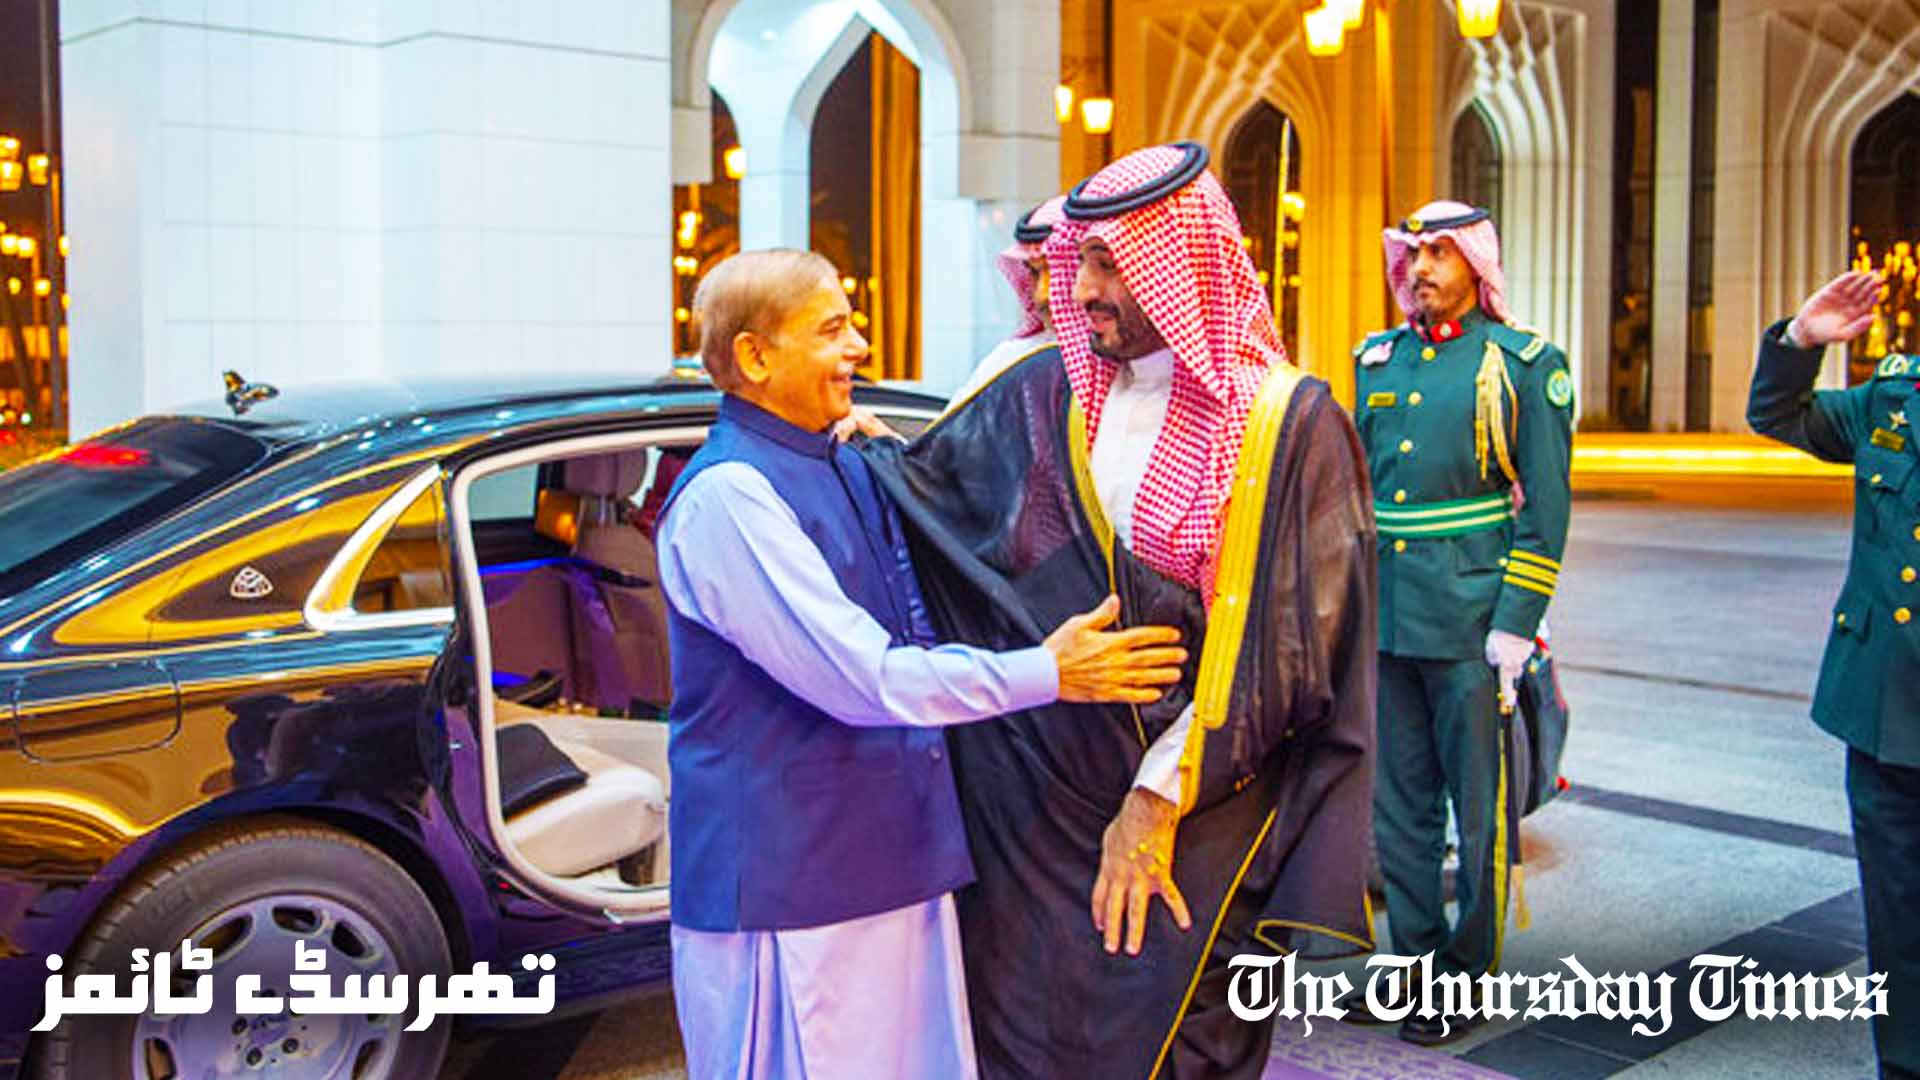 A file photo is shown of Pakistani prime minister Shehbaz Sharif and Saudi crown prince Mohammad bin Salman. — FILE/THE THURSDAY TIMES